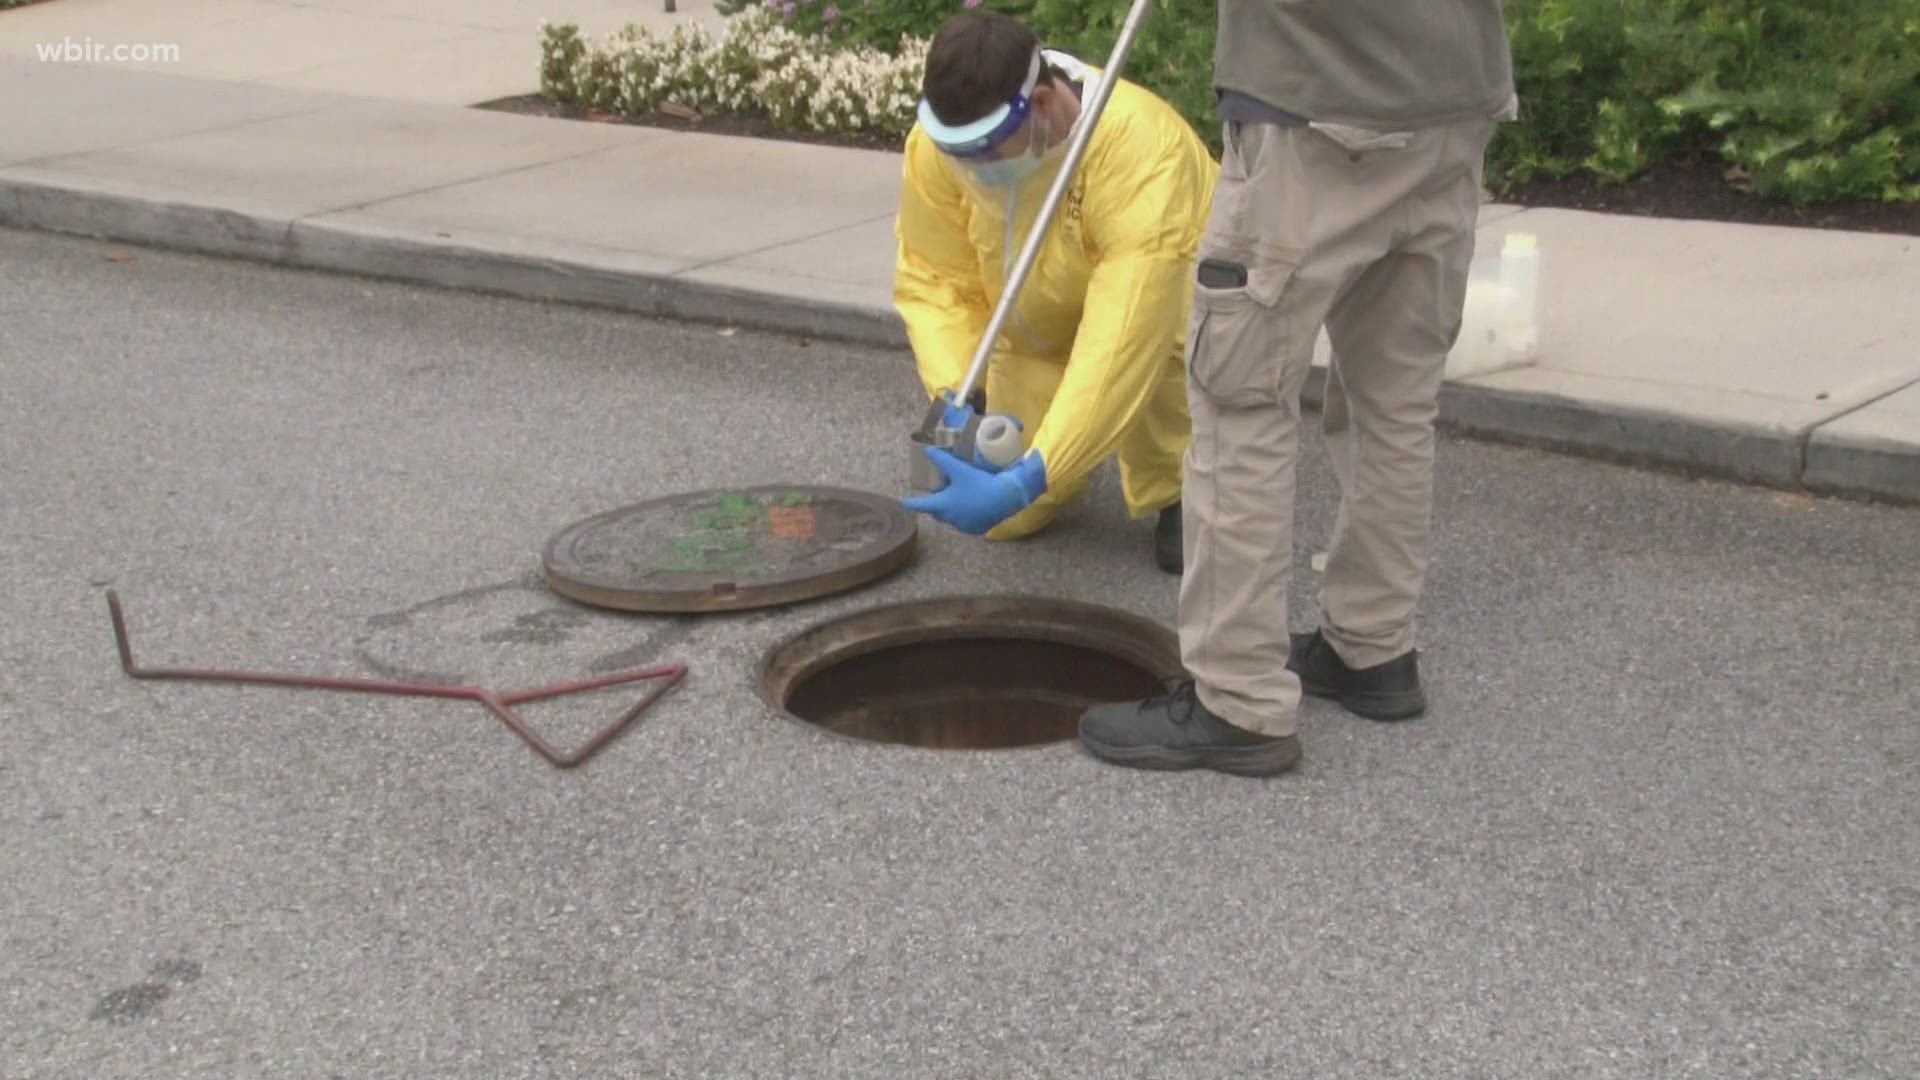 The University of Tennessee has a three-pronged testing approach for COVID-19, and it begins at the bottom with wastewater pulled from sewers underneath UT dorms.